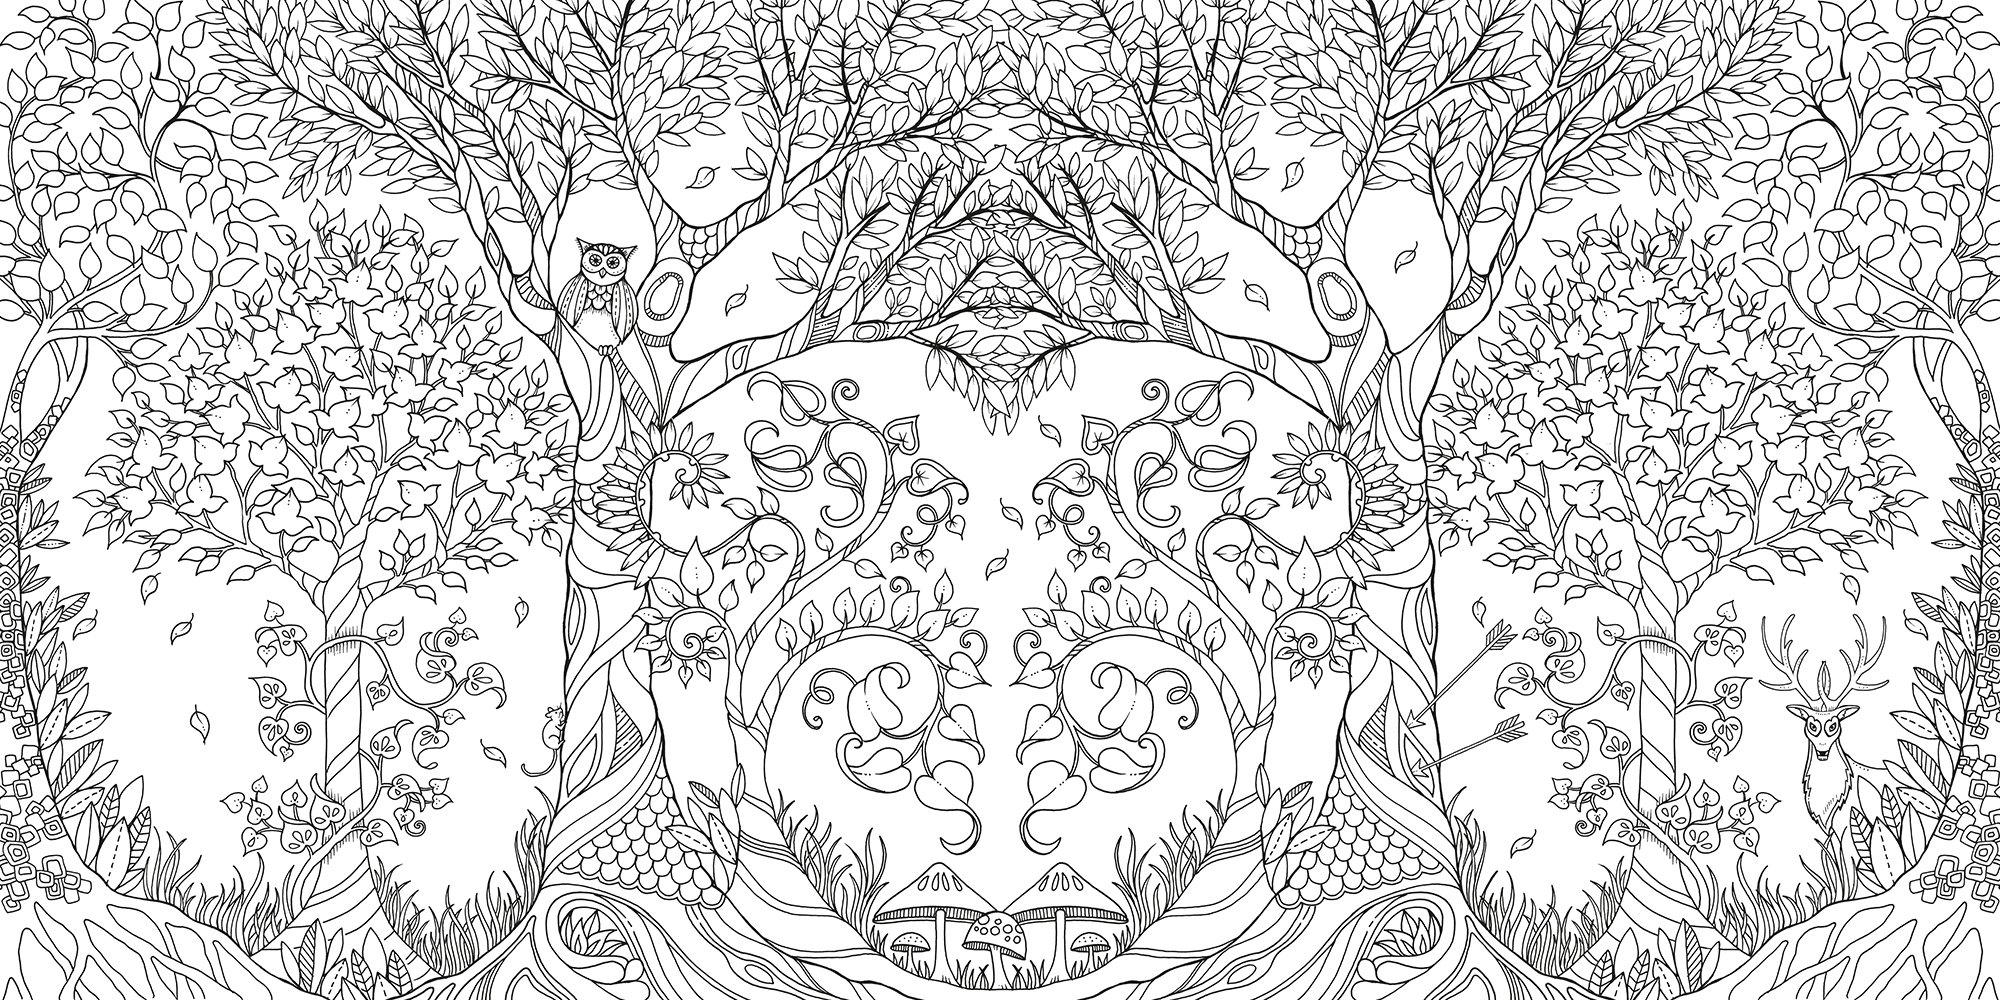 Animal Coloring Books Archives - Coloring Book Addict